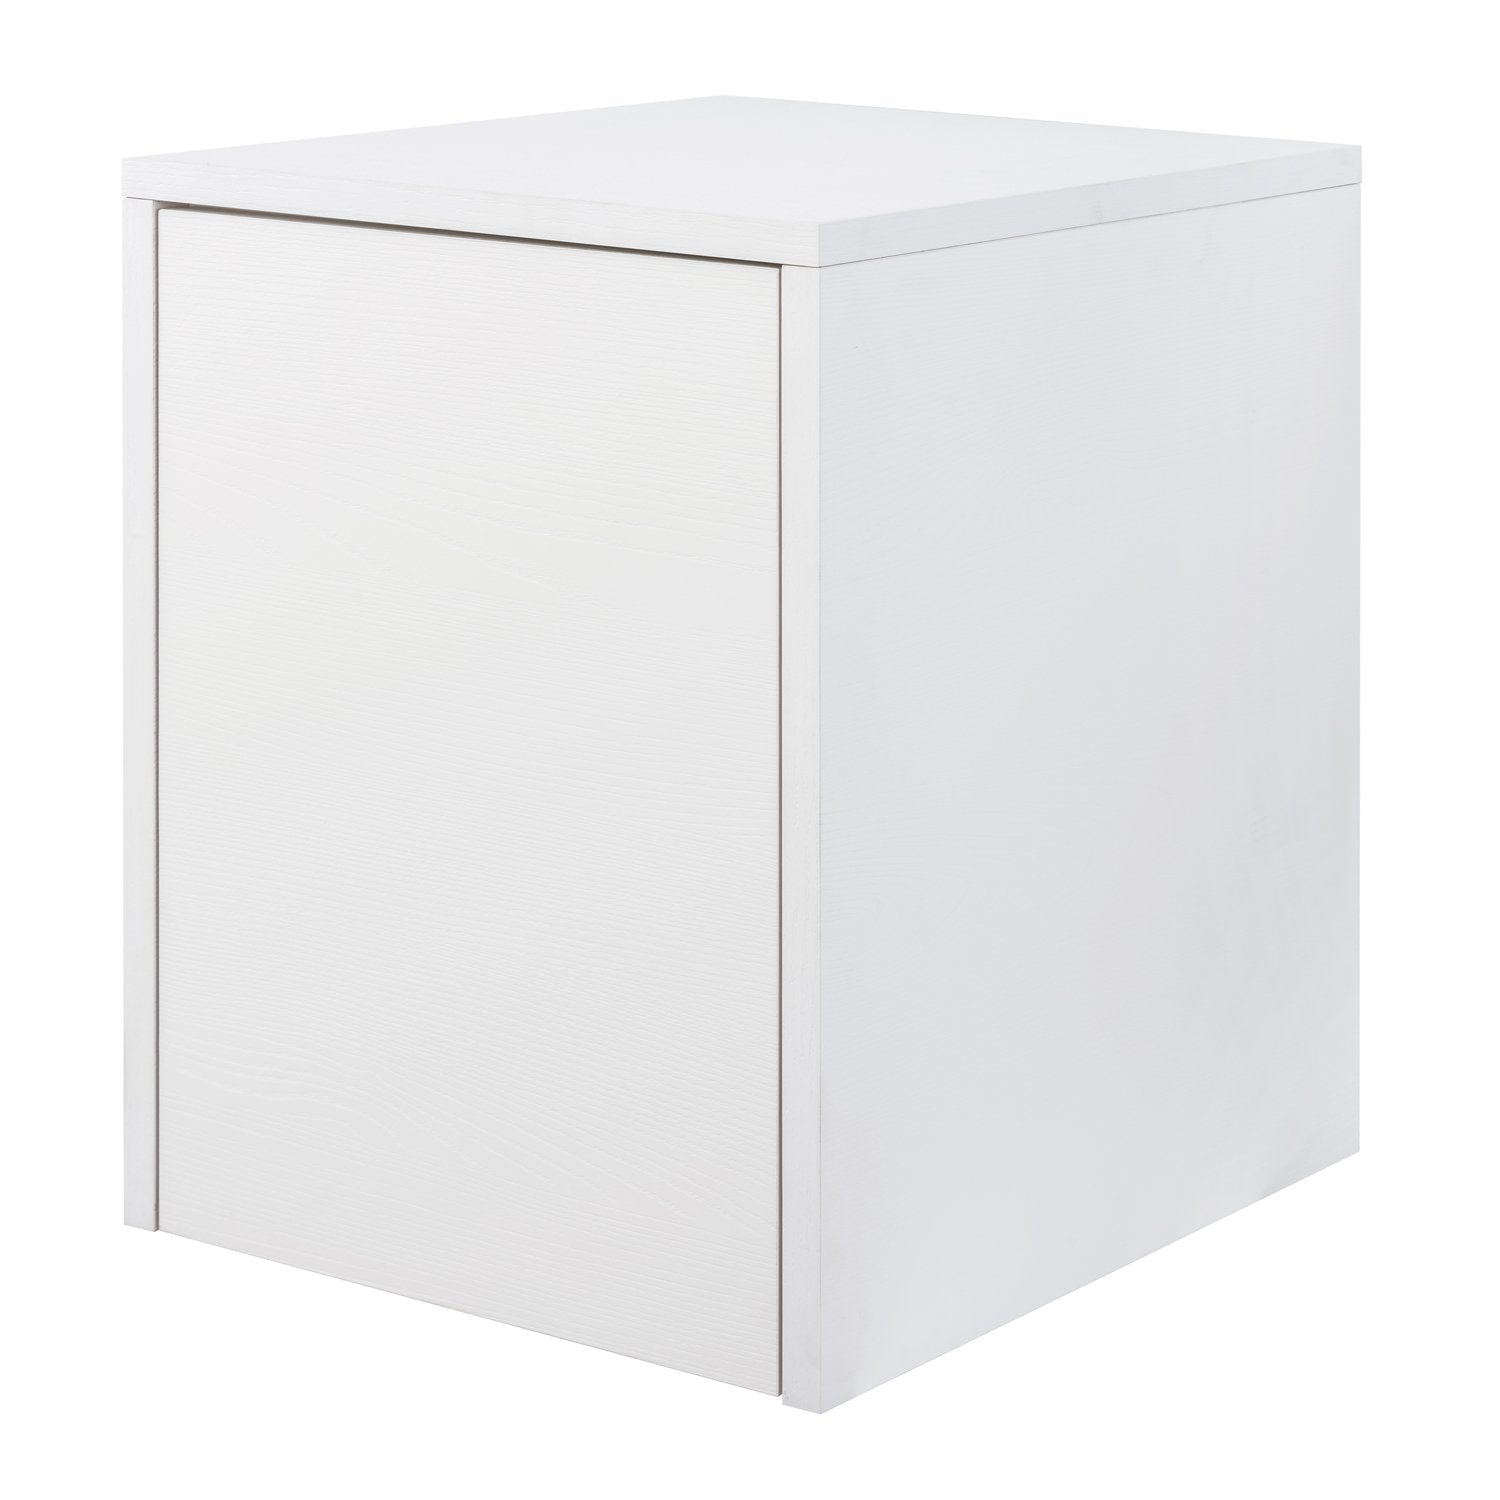 16" Lower Side Cabinet, Wall Mount, 1 Door, White, ZEN Collection by DAX